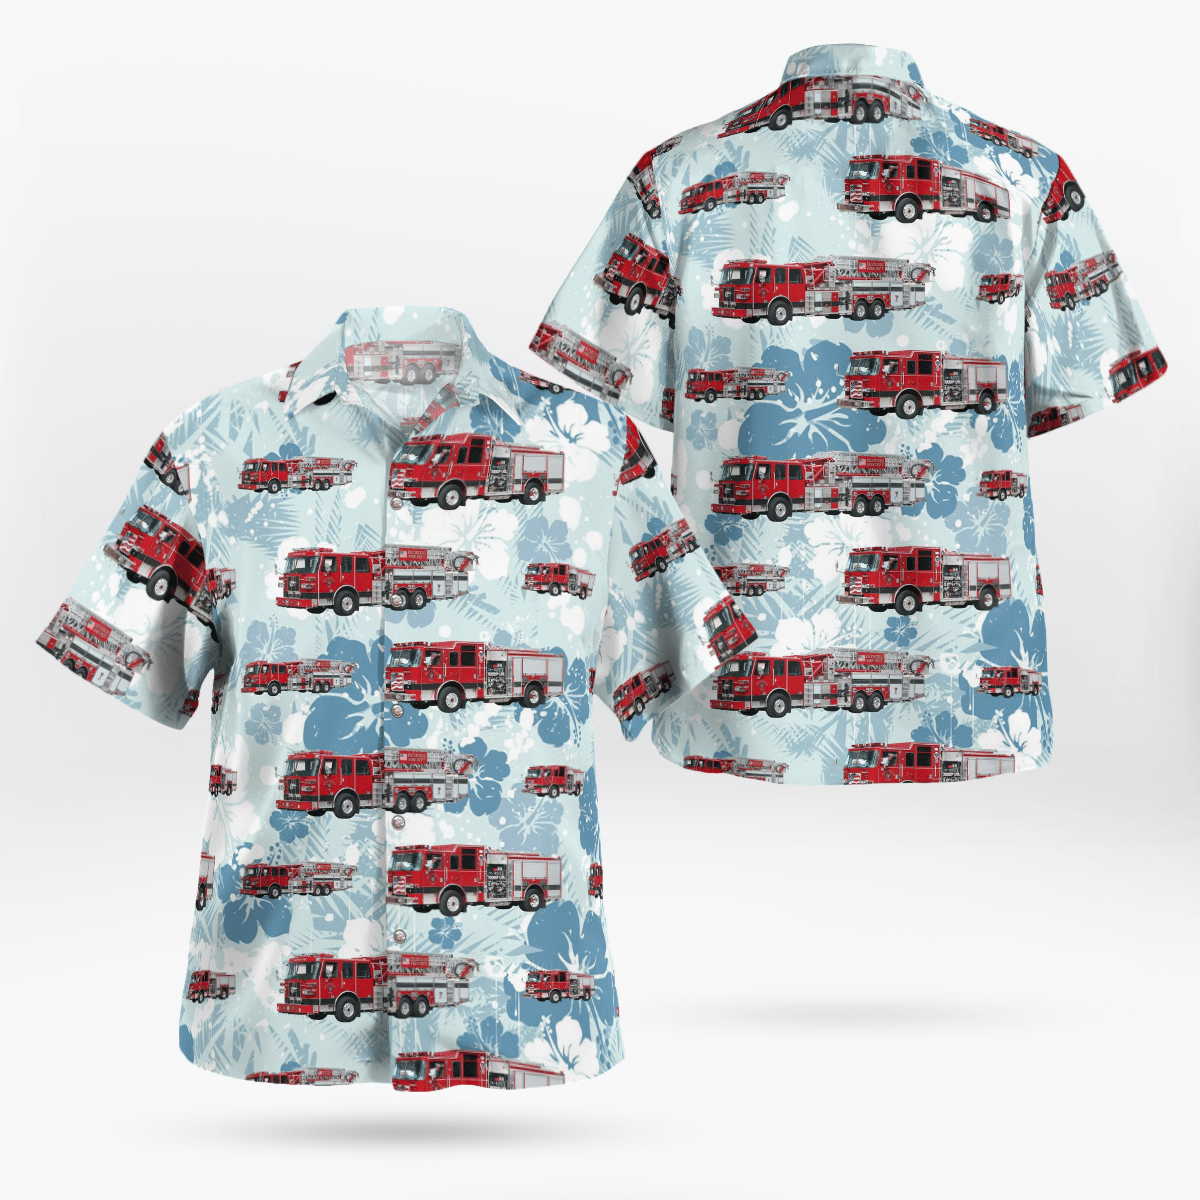 If you are in need of a new summertime look, pick up this Hawaiian shirt 171